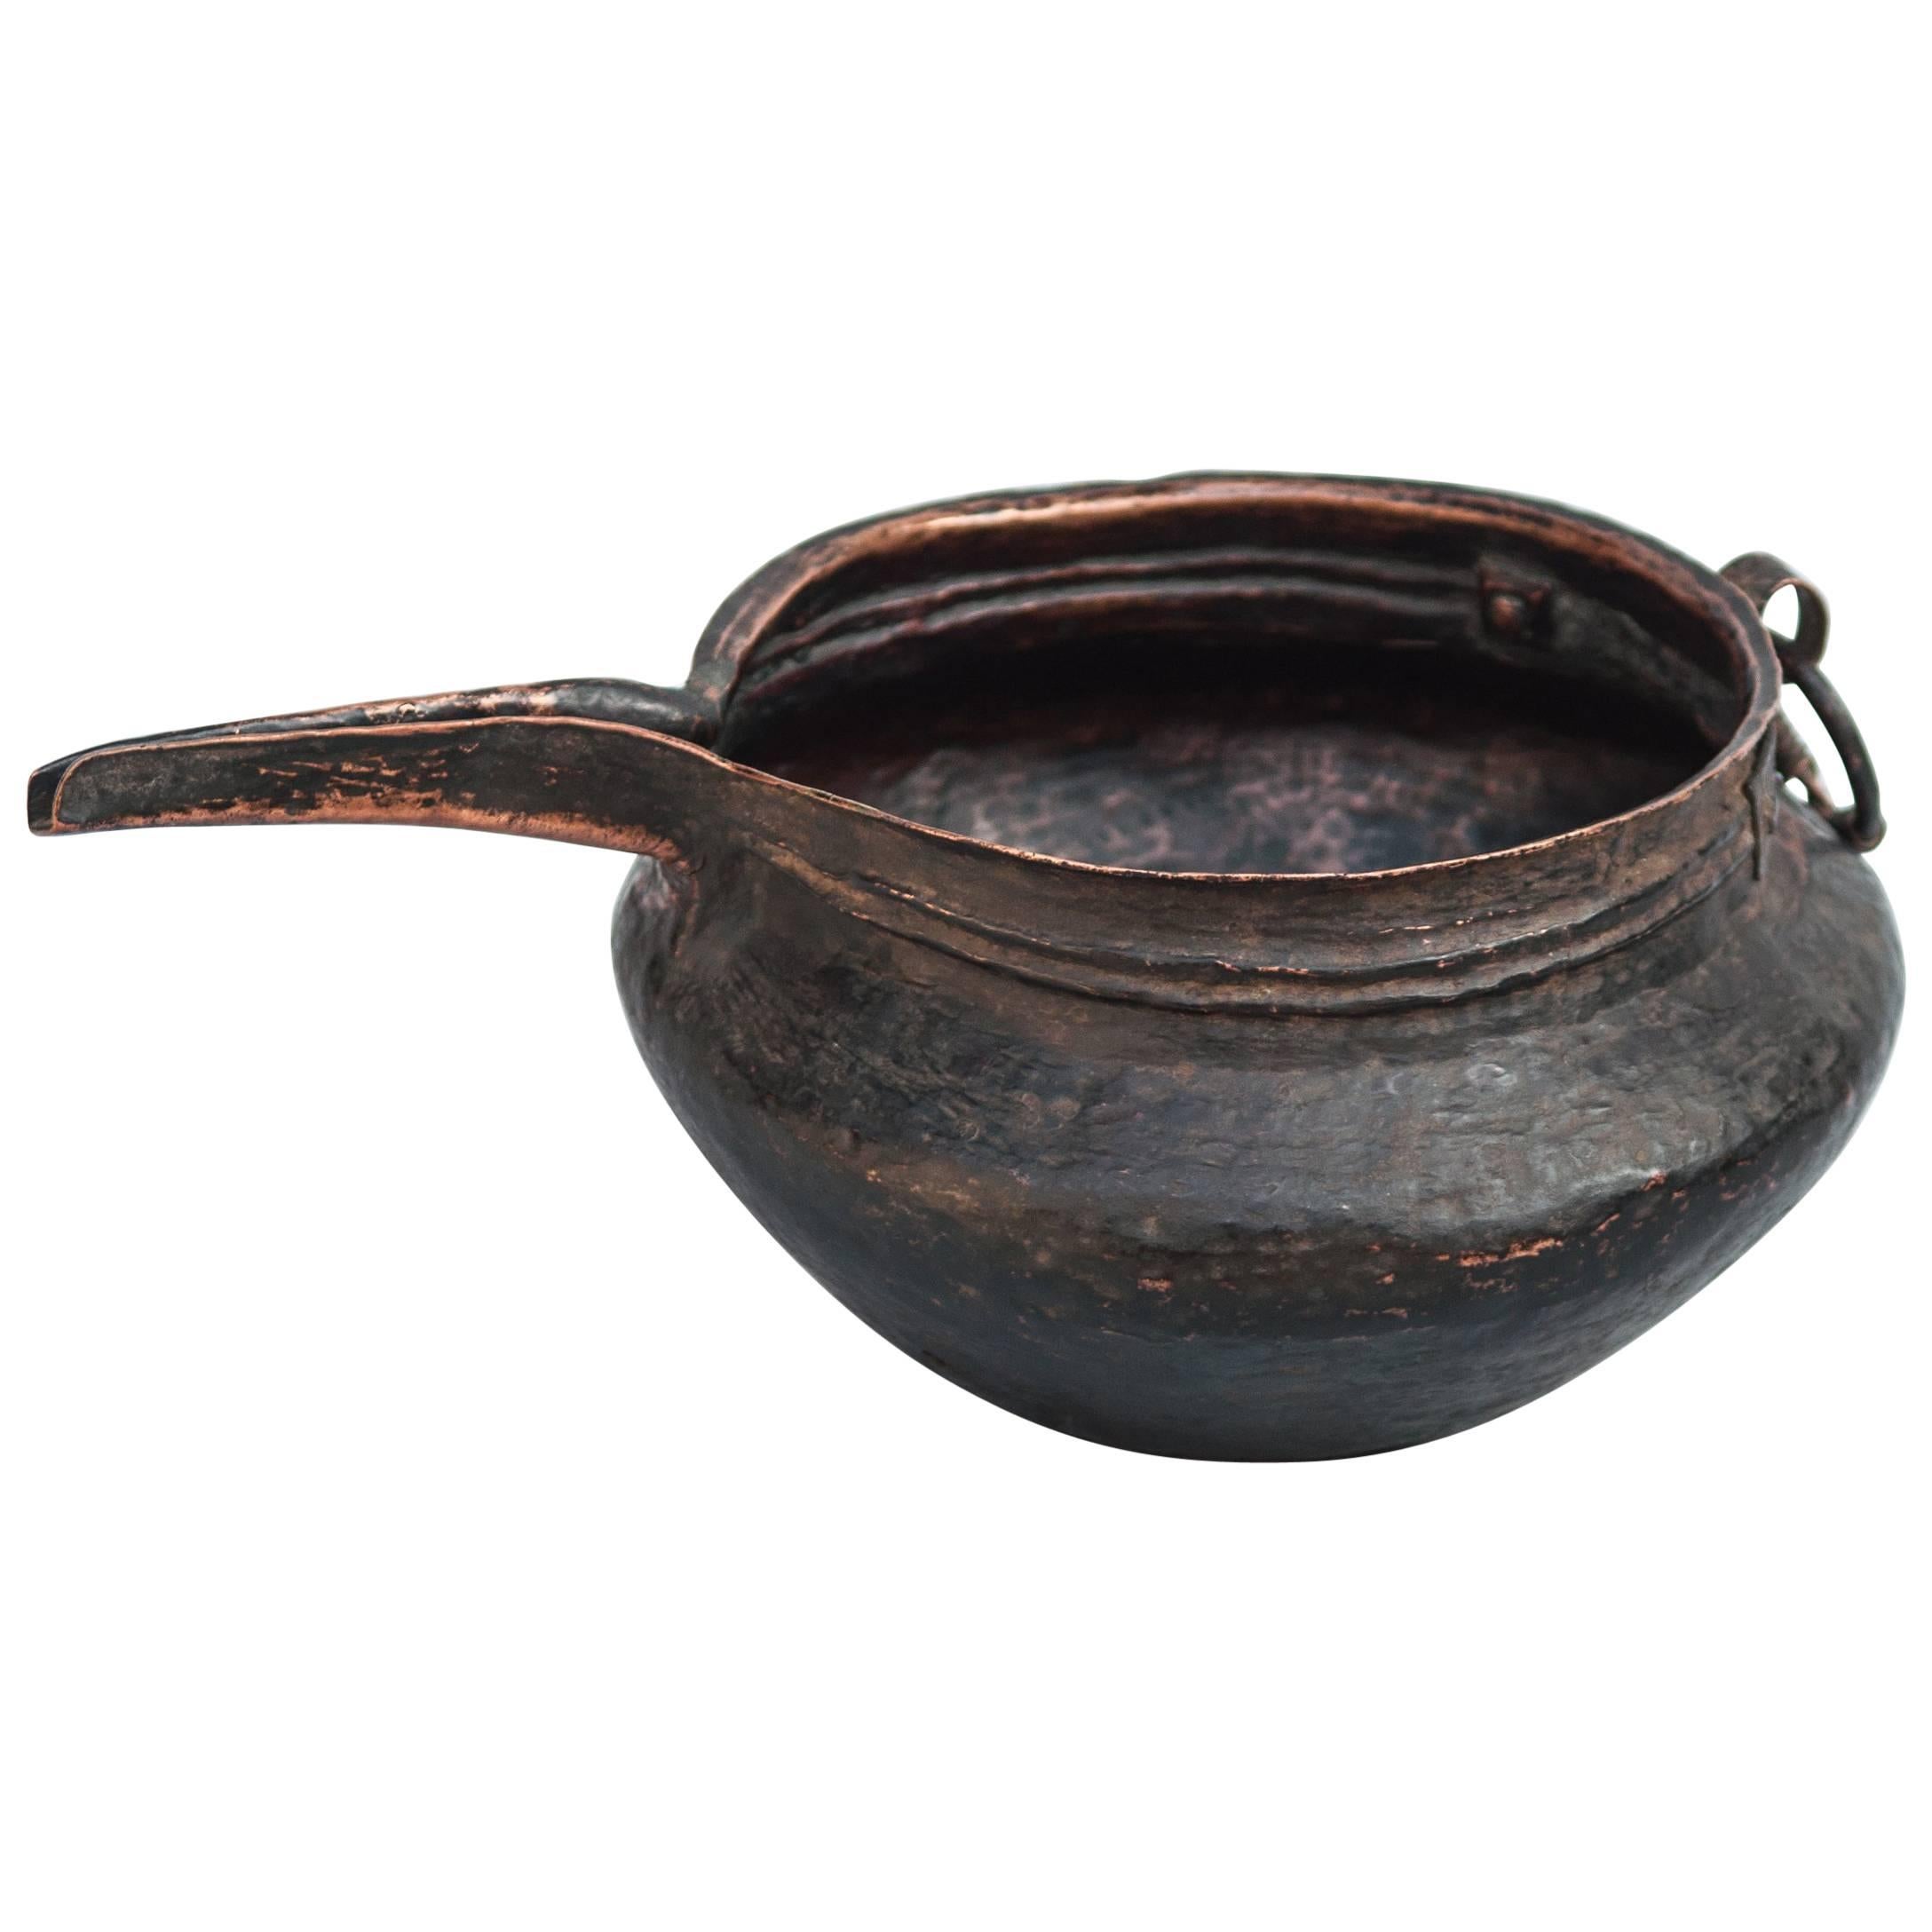 Copper Pot with Spout, Hand-Hammered, Tibet, Mid-20th Century